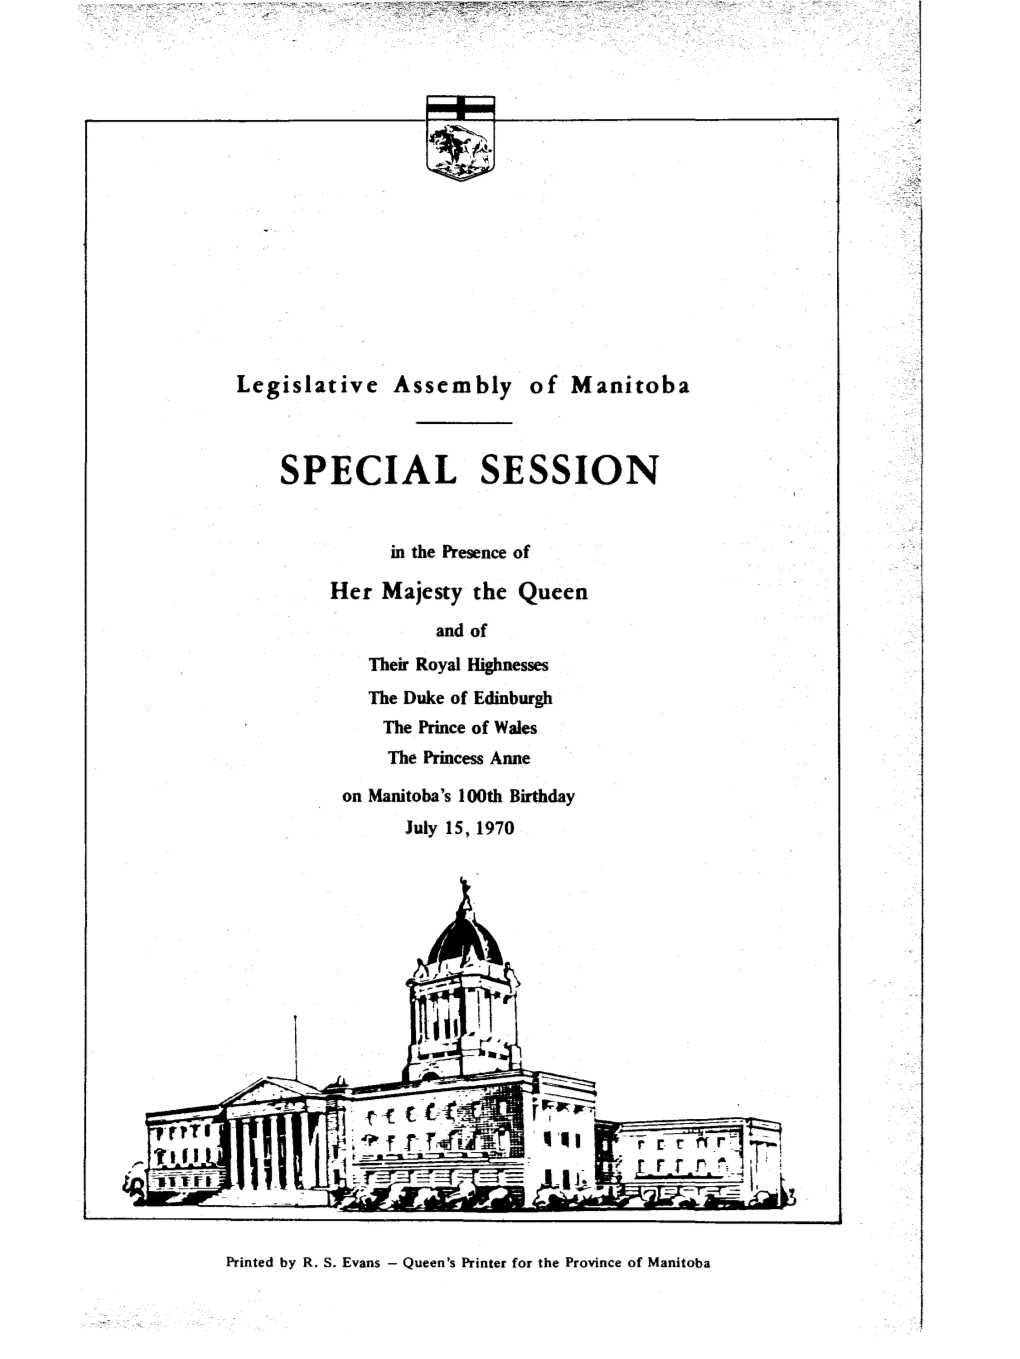 Special Session